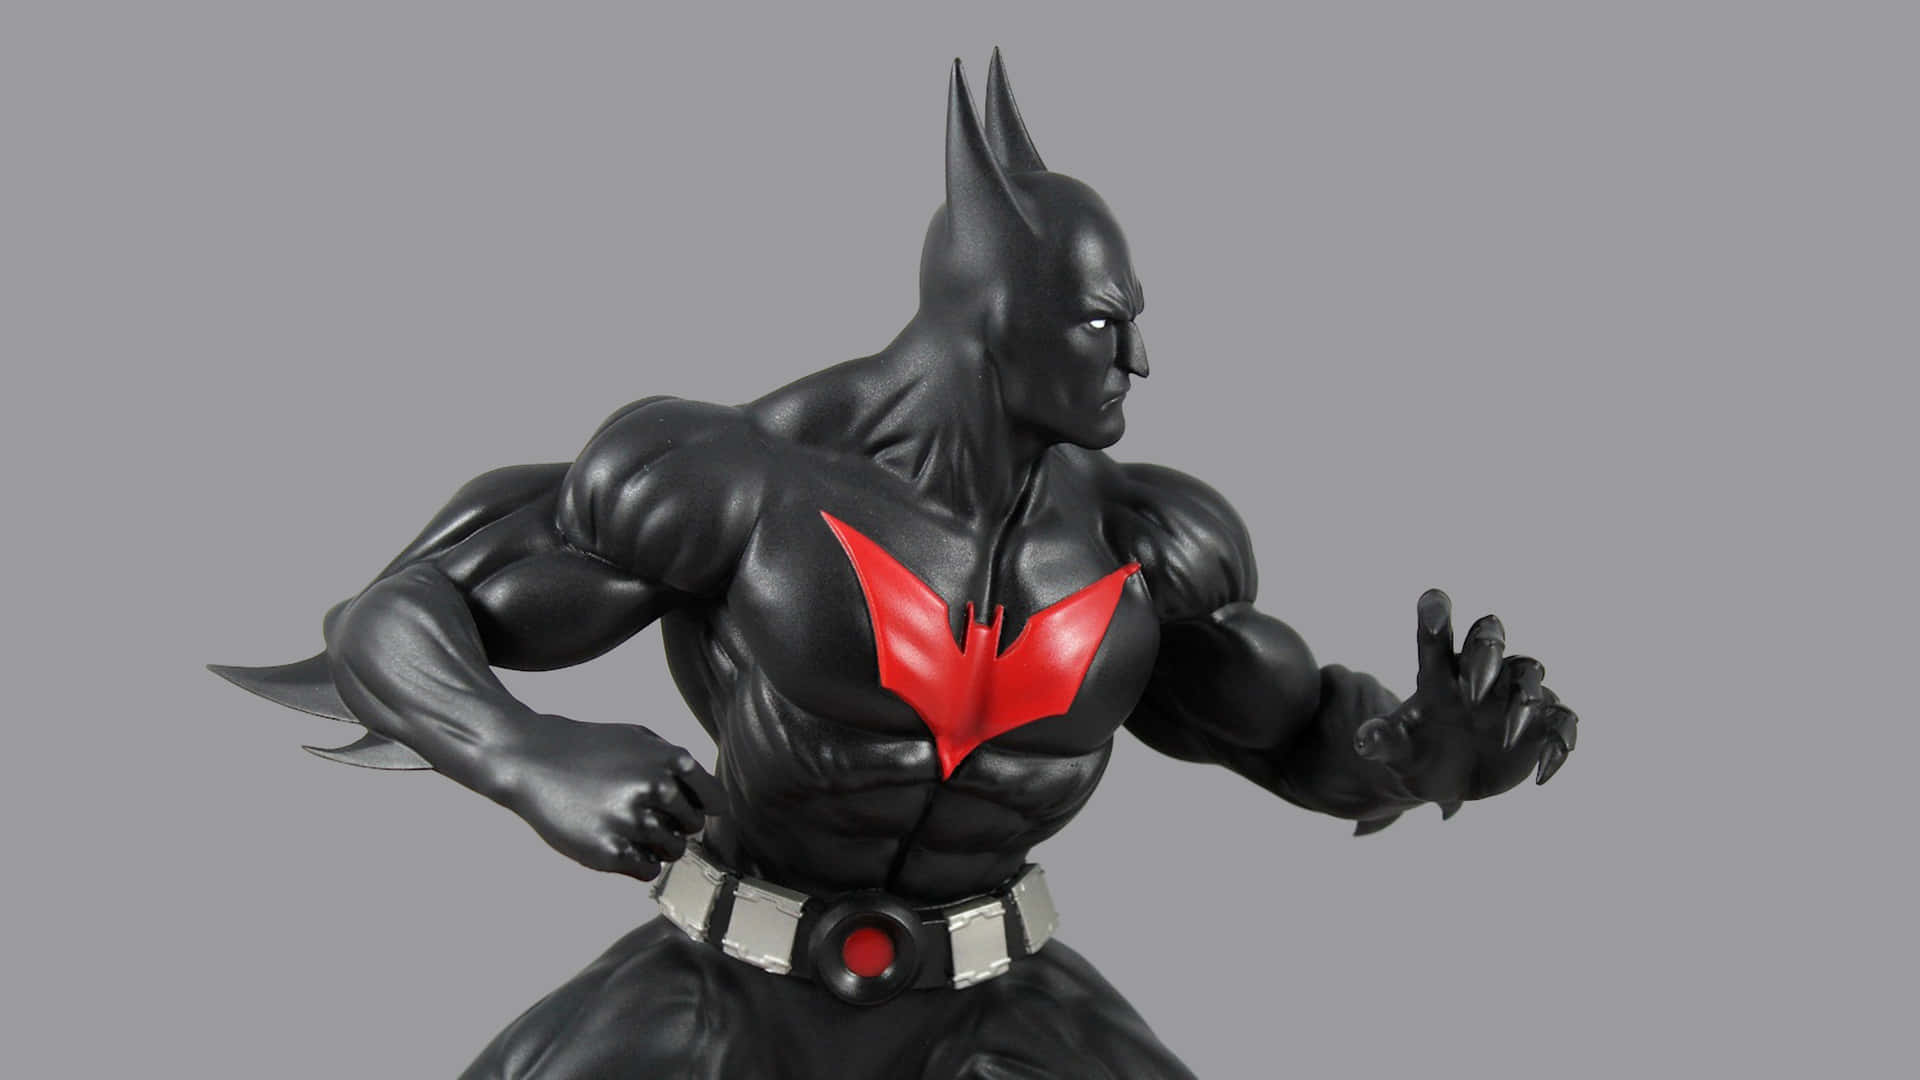 "Dive into tomorrow with Batman Beyond"